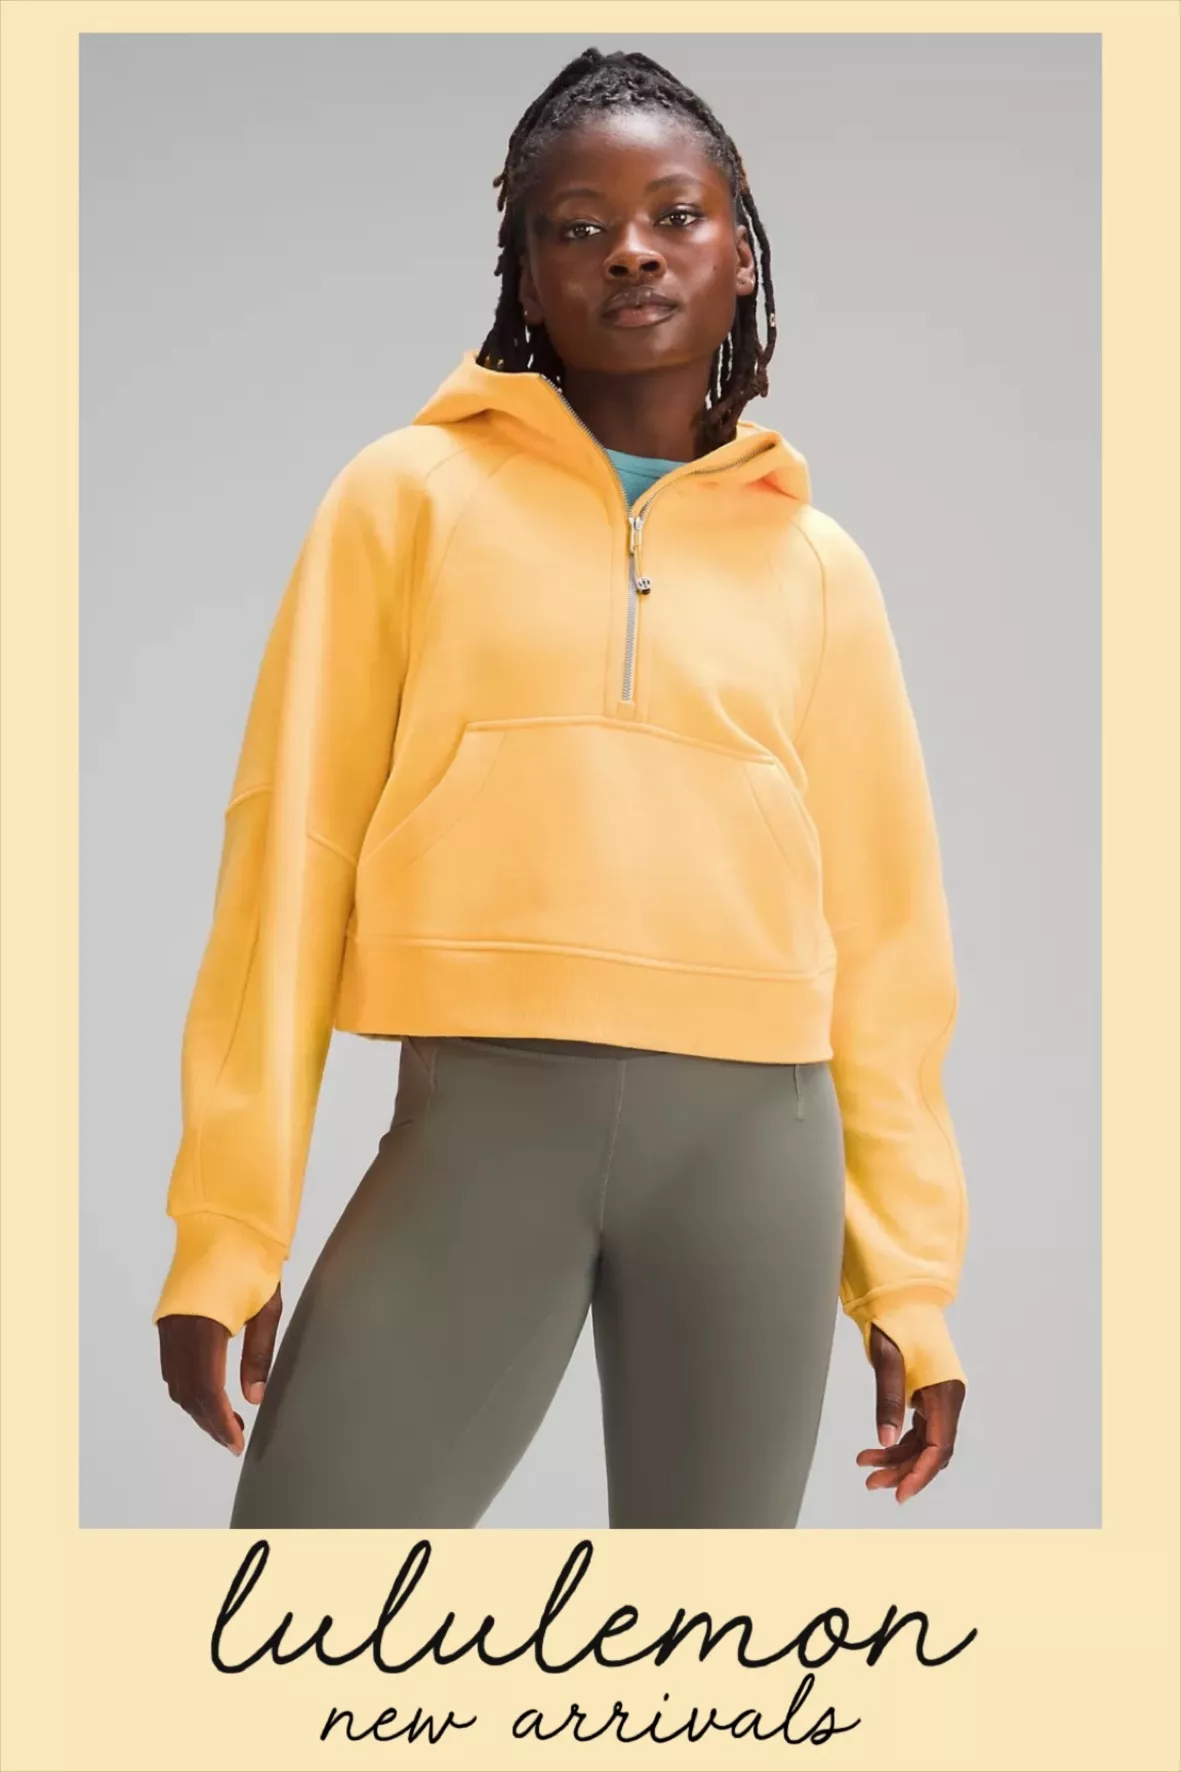 Scuba Full-Zip Cropped Hoodie curated on LTK